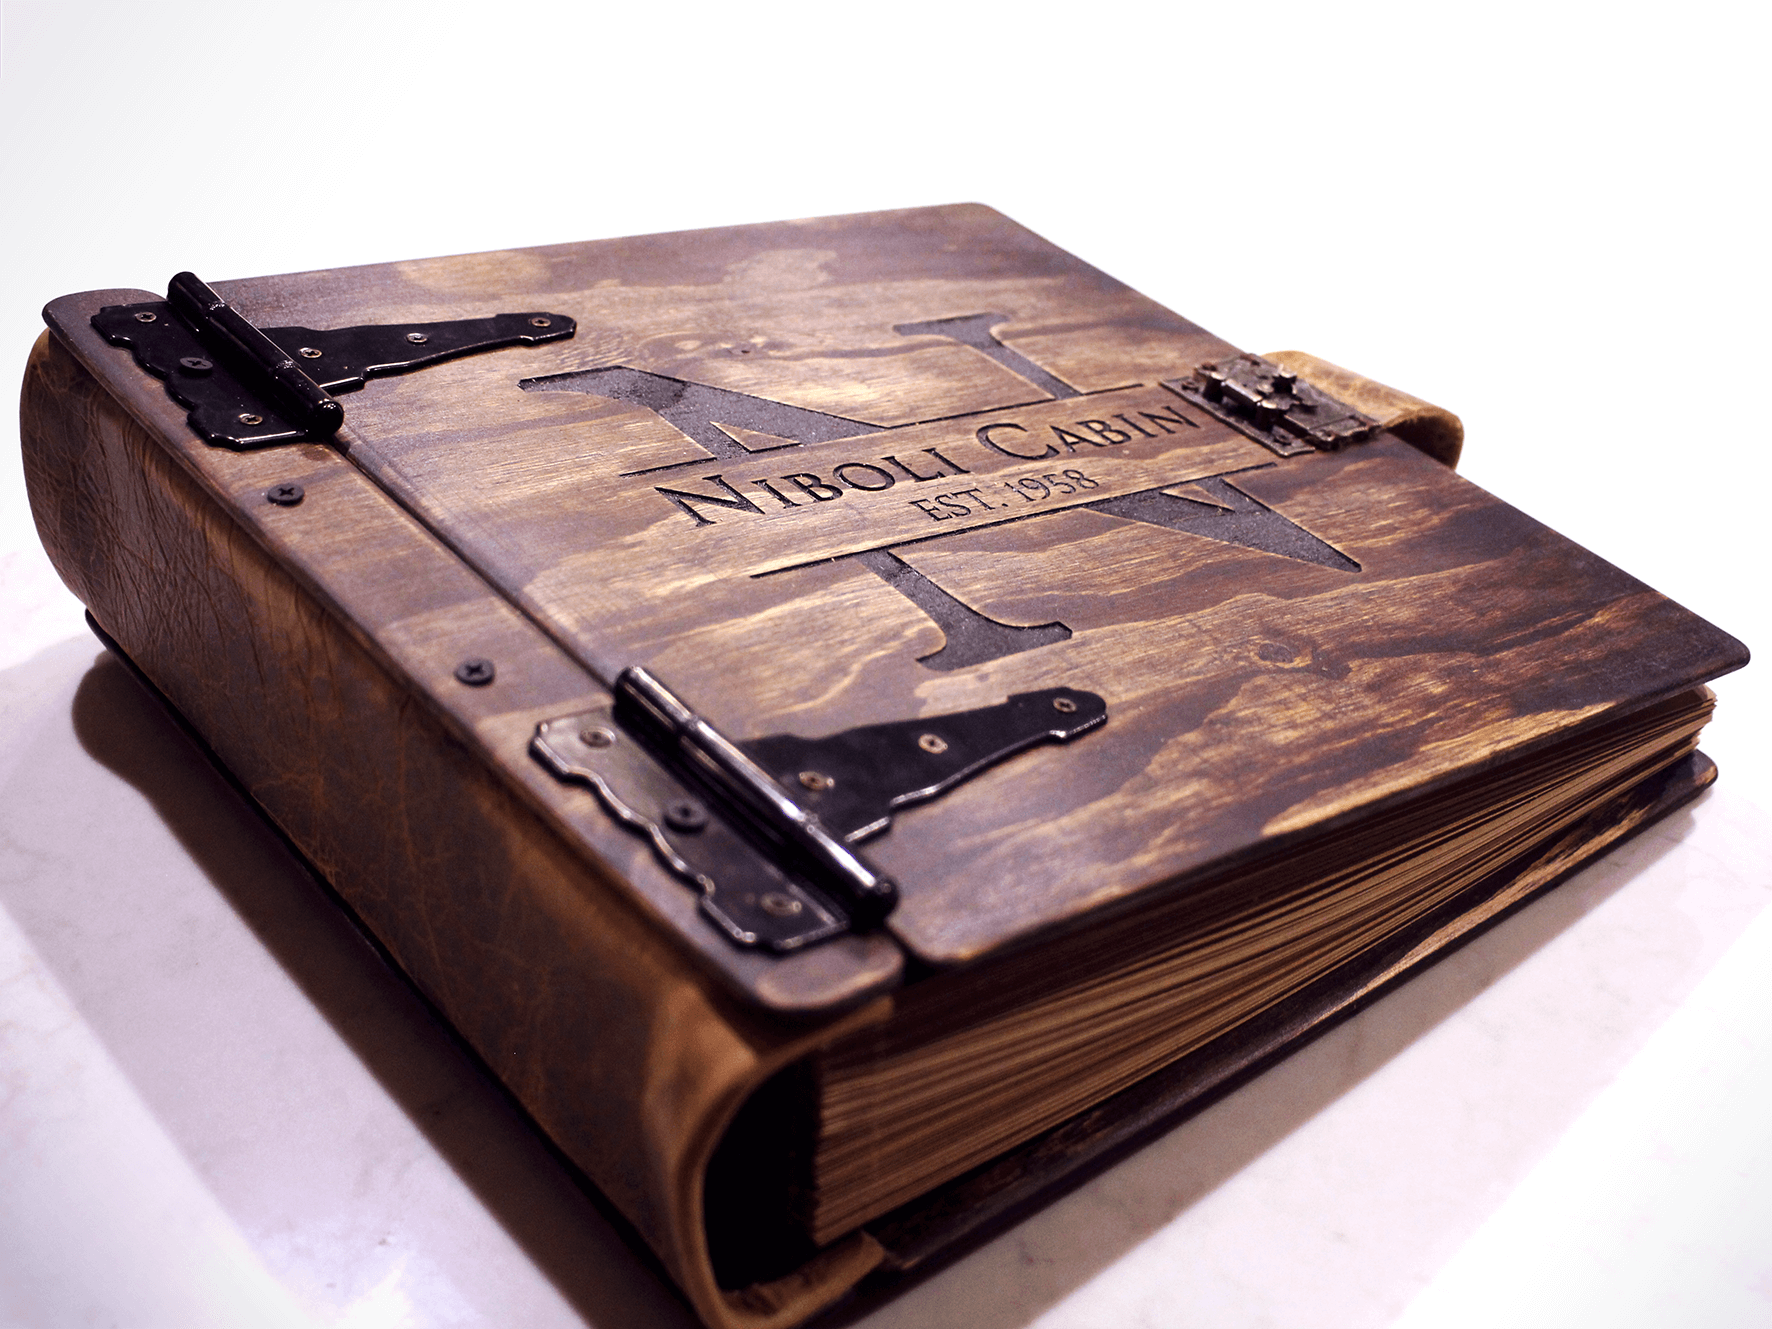 Engraved Wood and Leather Travel Journal | Keep your travel memories close with this engraved wood and leather travel journal by Rustic Engravings - the perfect way to remember your travels.